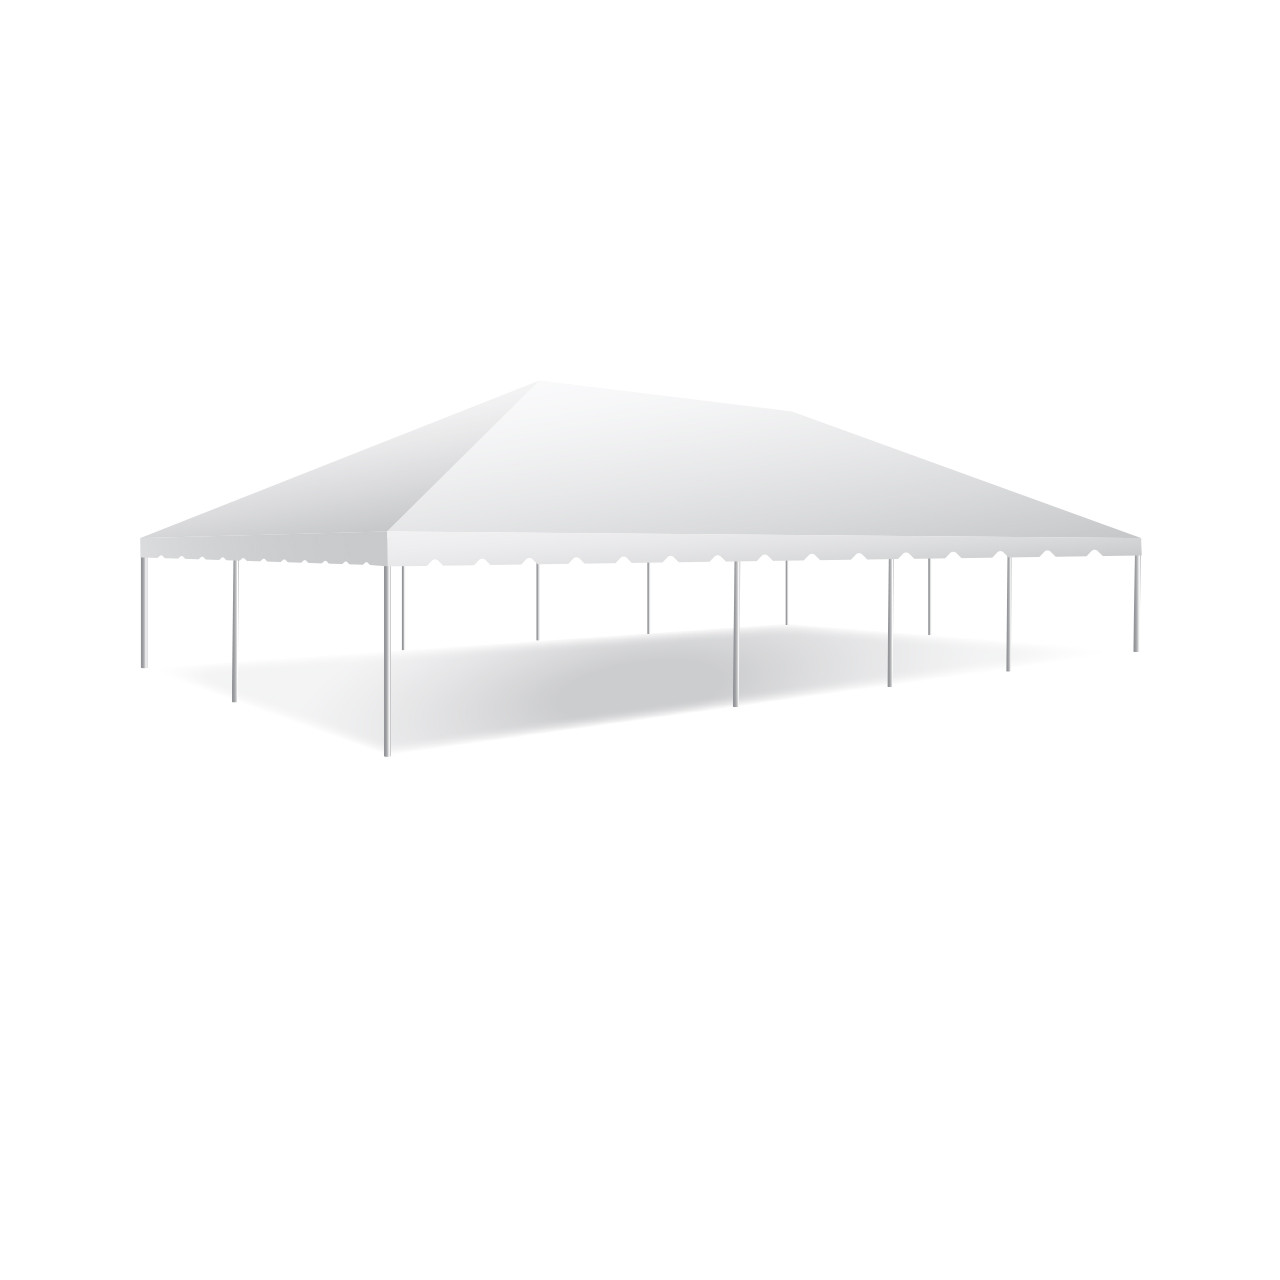 30' x 50' Classic Series Frame Tent, 1 Piece Tent Top, Complete